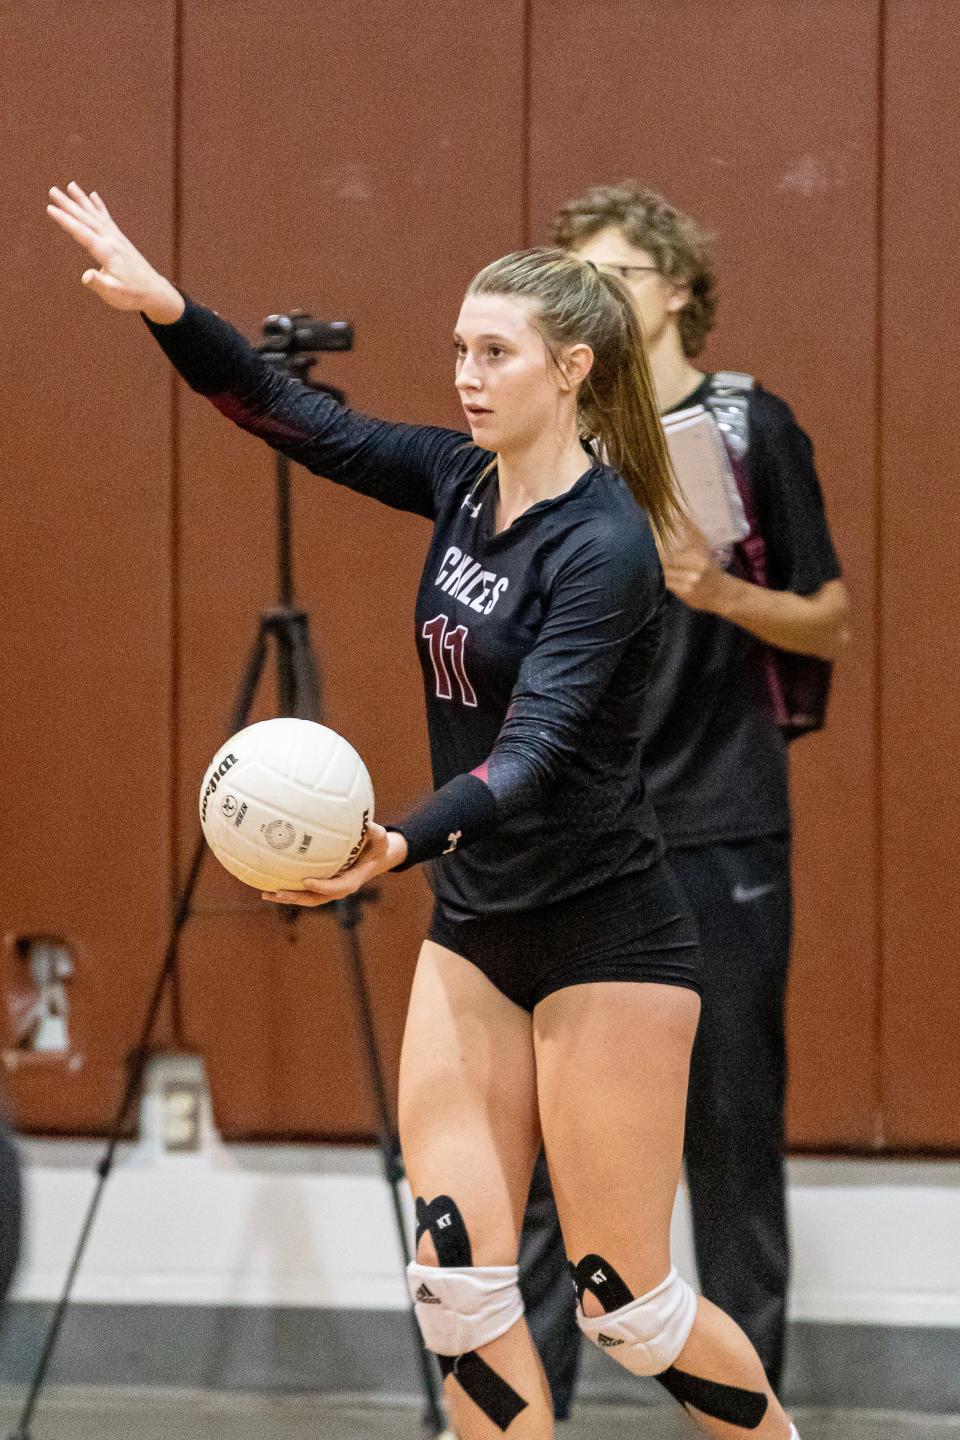 Chiles volleyball swept Ponte Vedra 3-0 to win the 6A Regional title and advance to the state final 4 for the first time in nearly two decades.